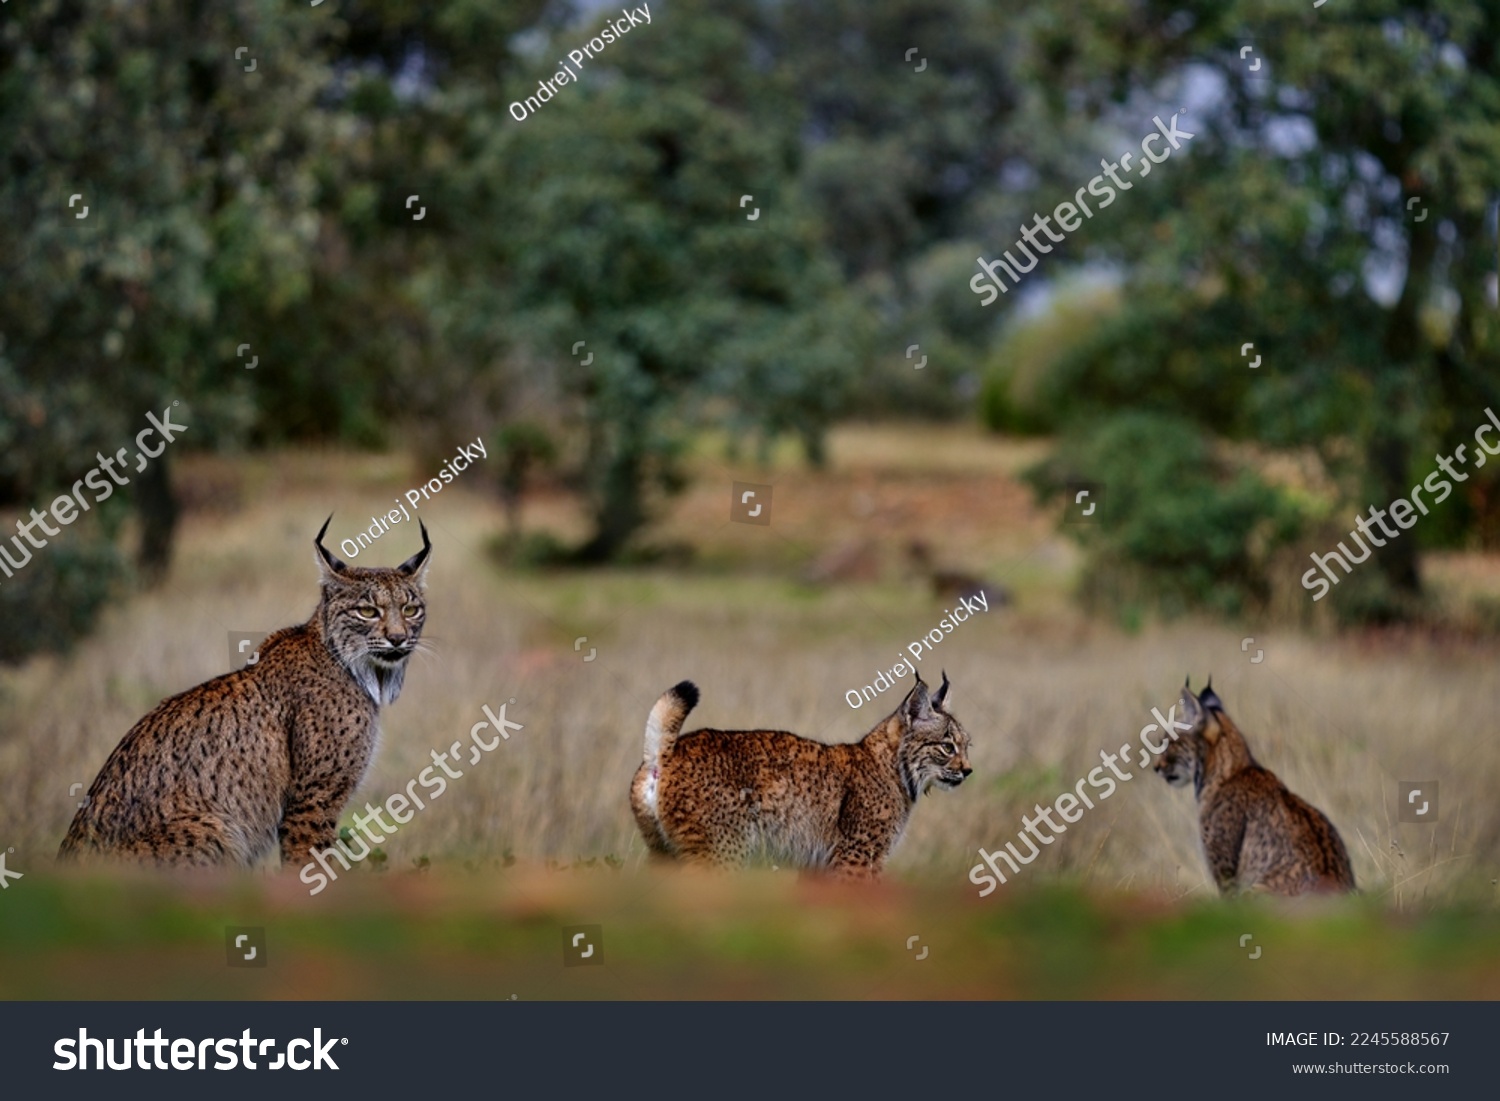 Iberian lynx, Lynx pardinus, mother with two young kitten, wild cat endemic to Iberian Peninsula in southwestern Spain in Europe. Rare cat walk in the nature habitat. Lynx family, nine month old cub. #2245588567